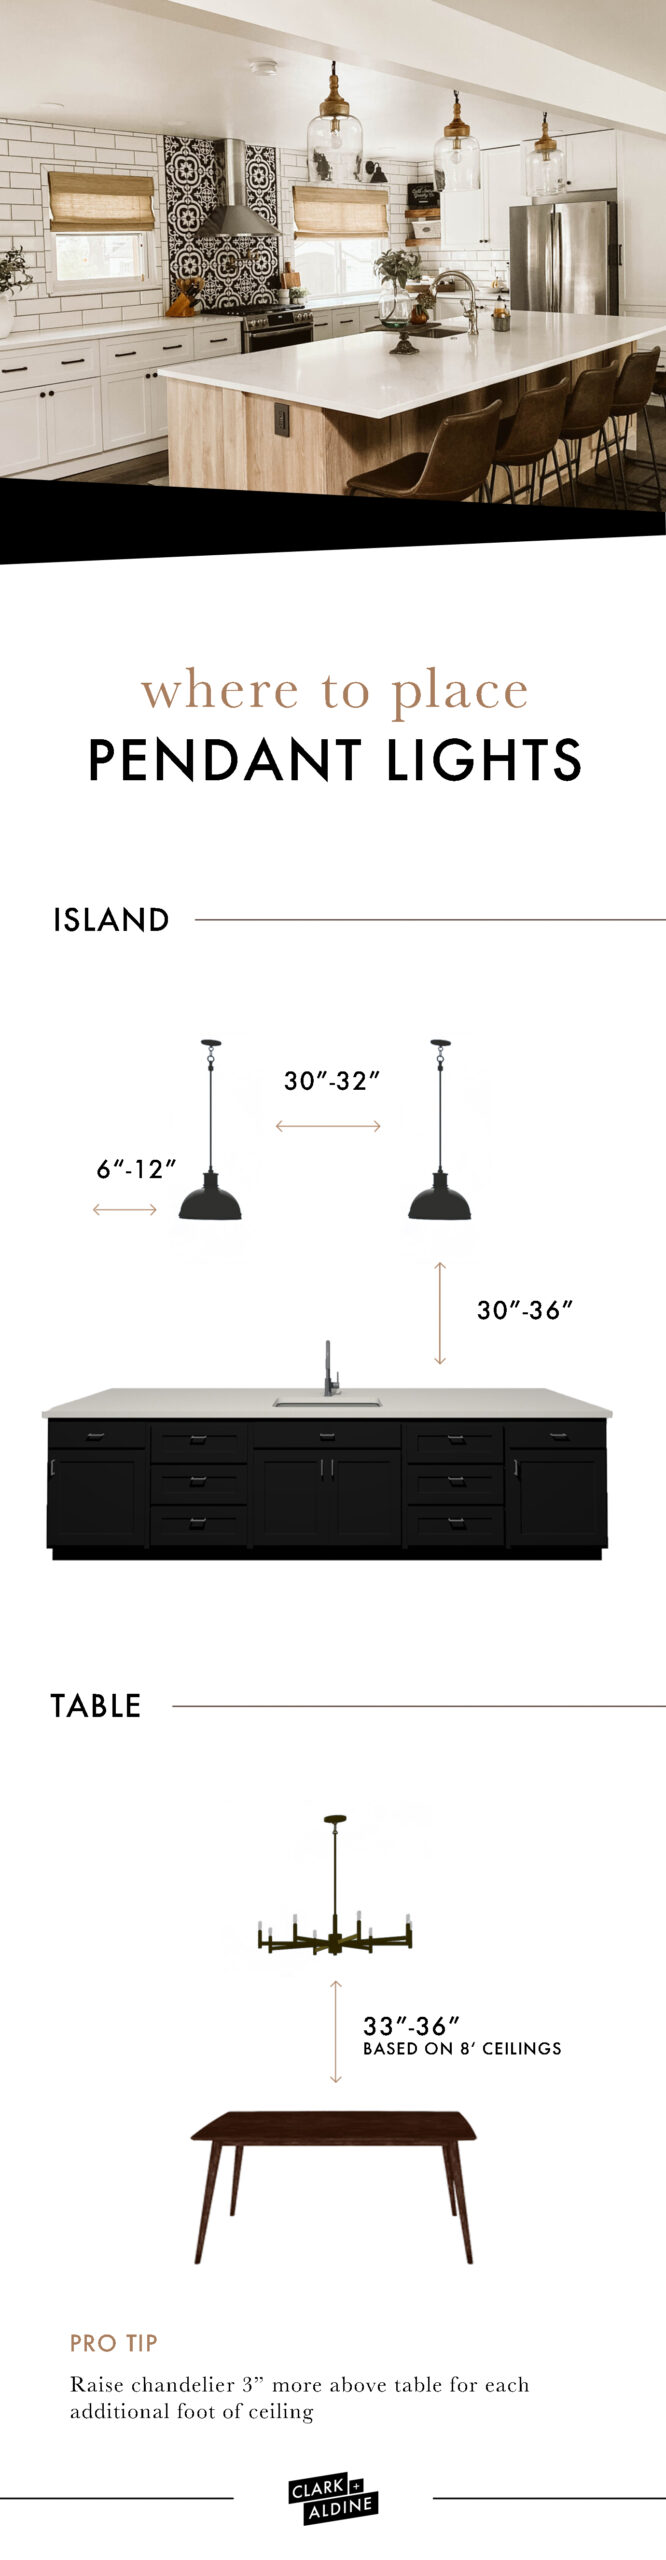 WHERE TO PLACE PENDANT LIGHTING image 1